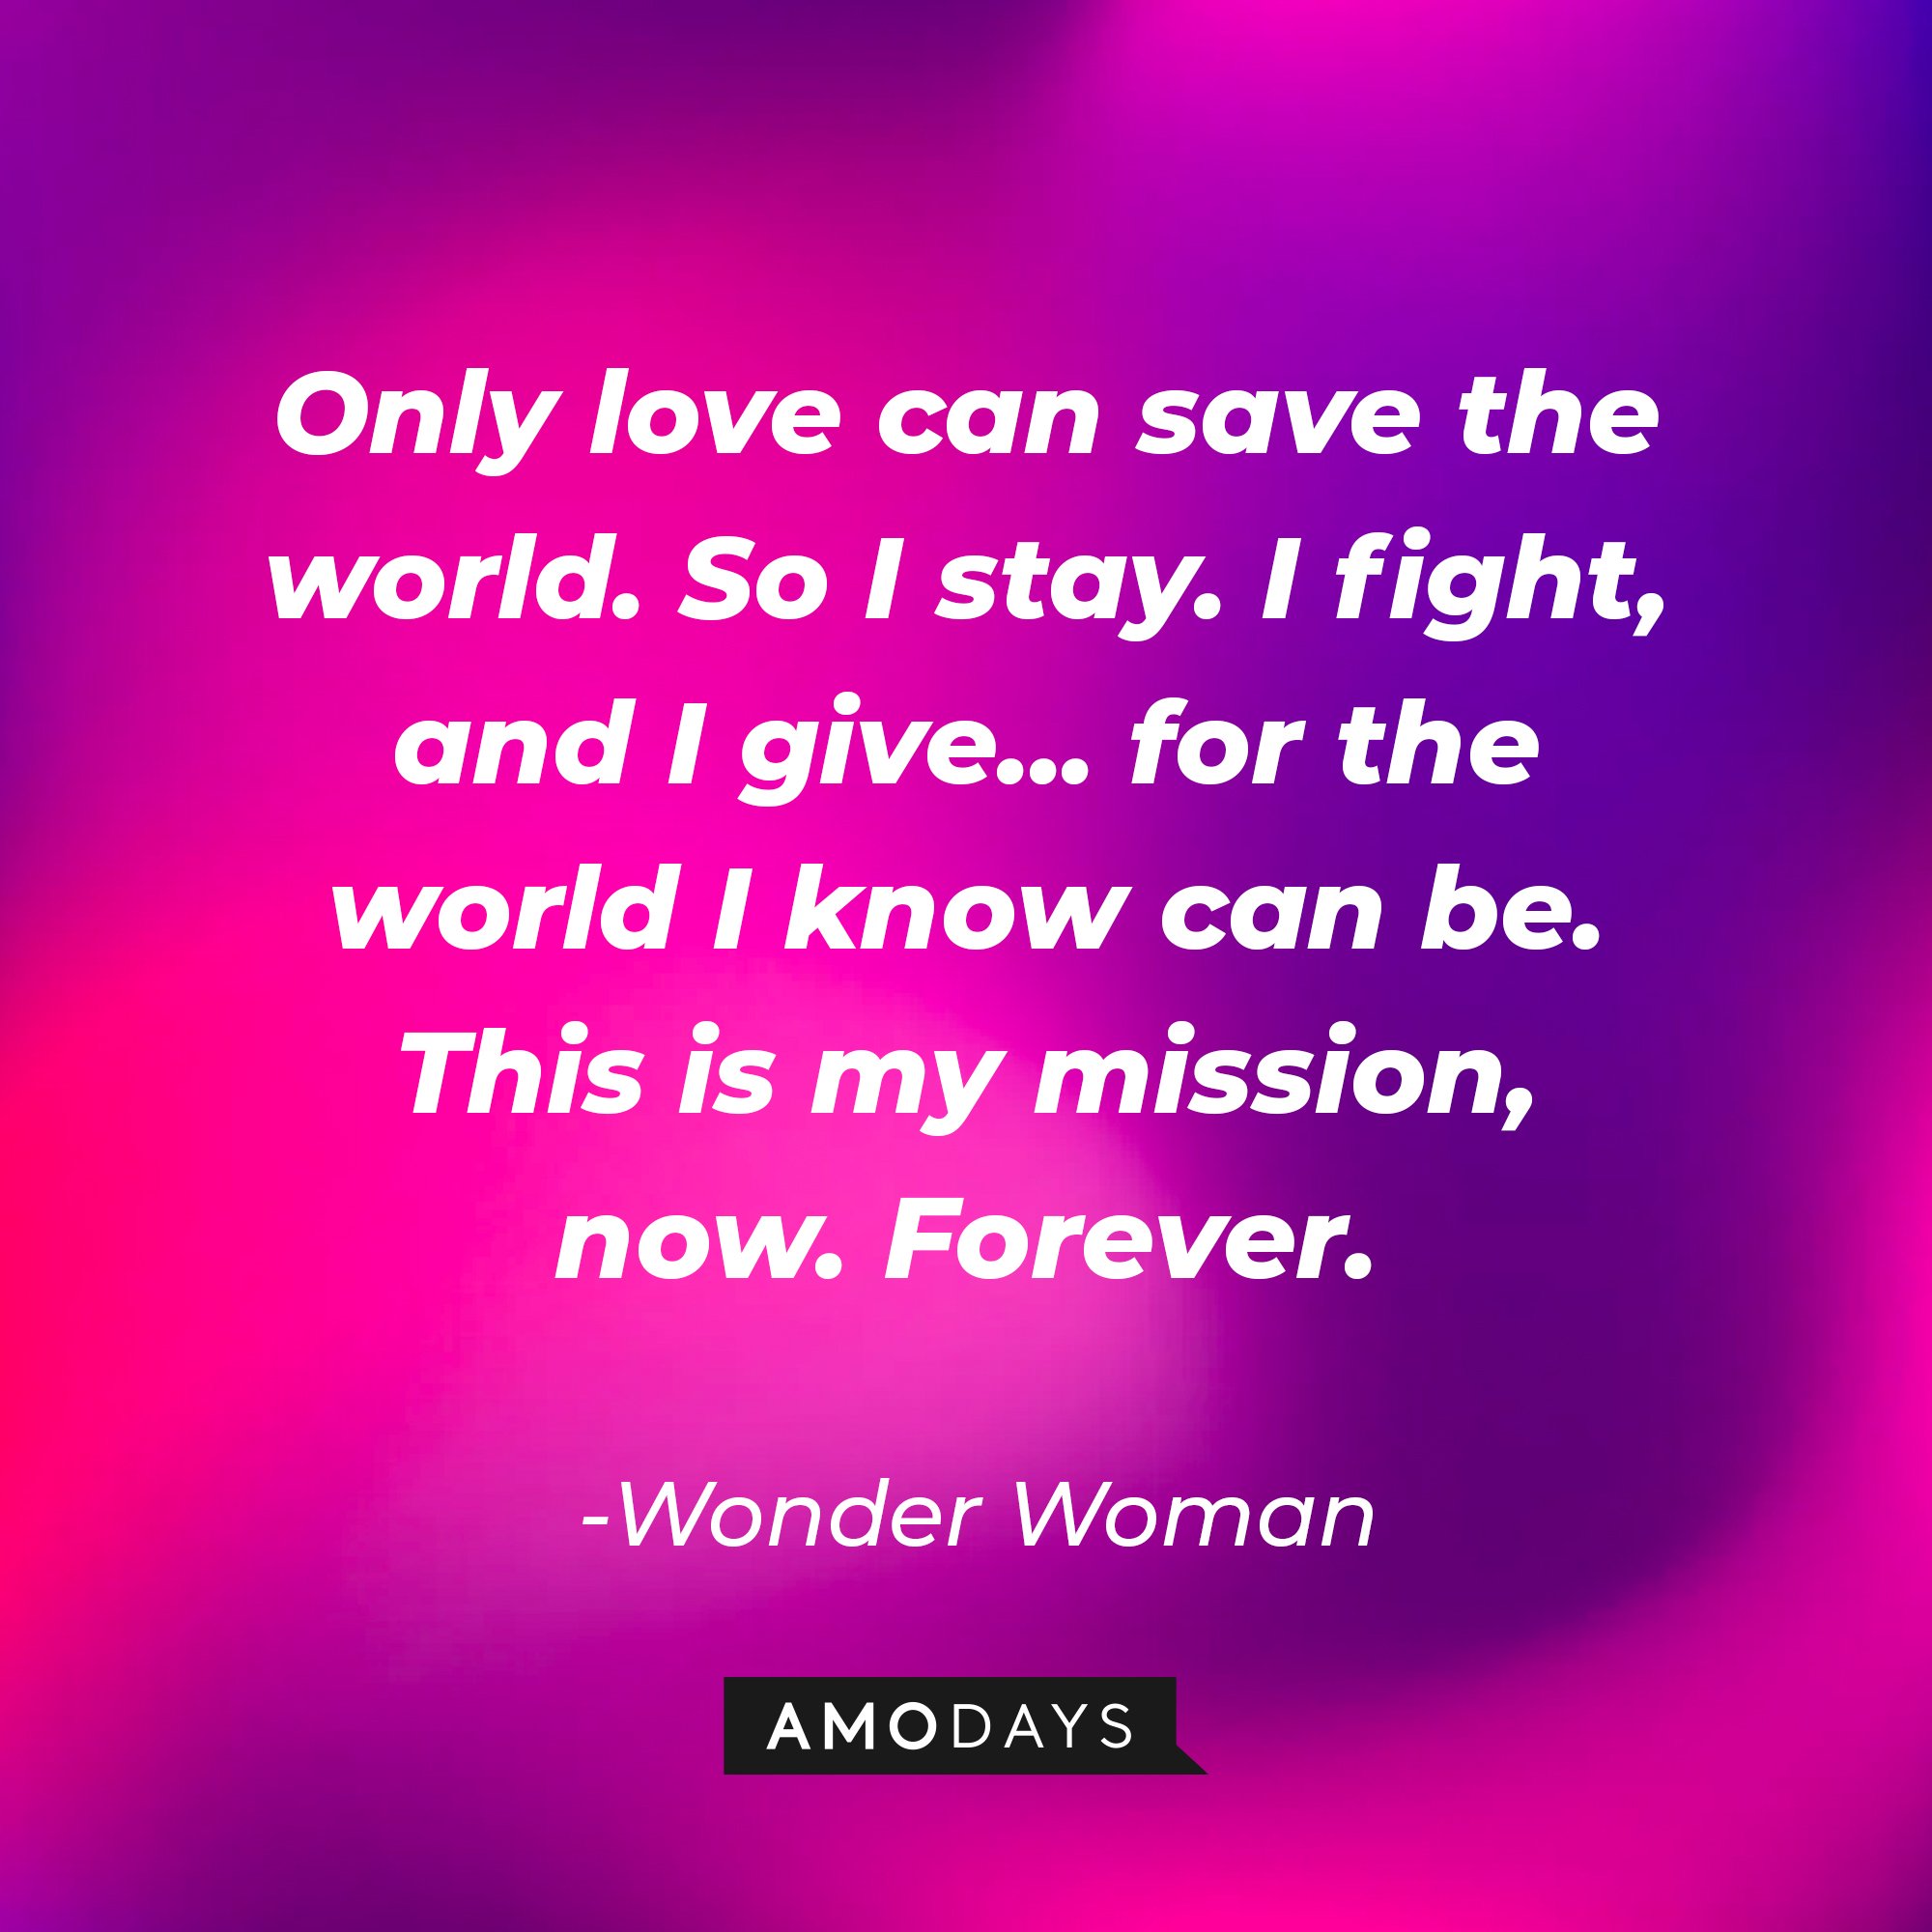 Wonder Woman's quote: "Only love can save the world. So I stay. I fight, and I give... for the world I know can be. This is my mission, now. Forever."  | Image: AmoDays